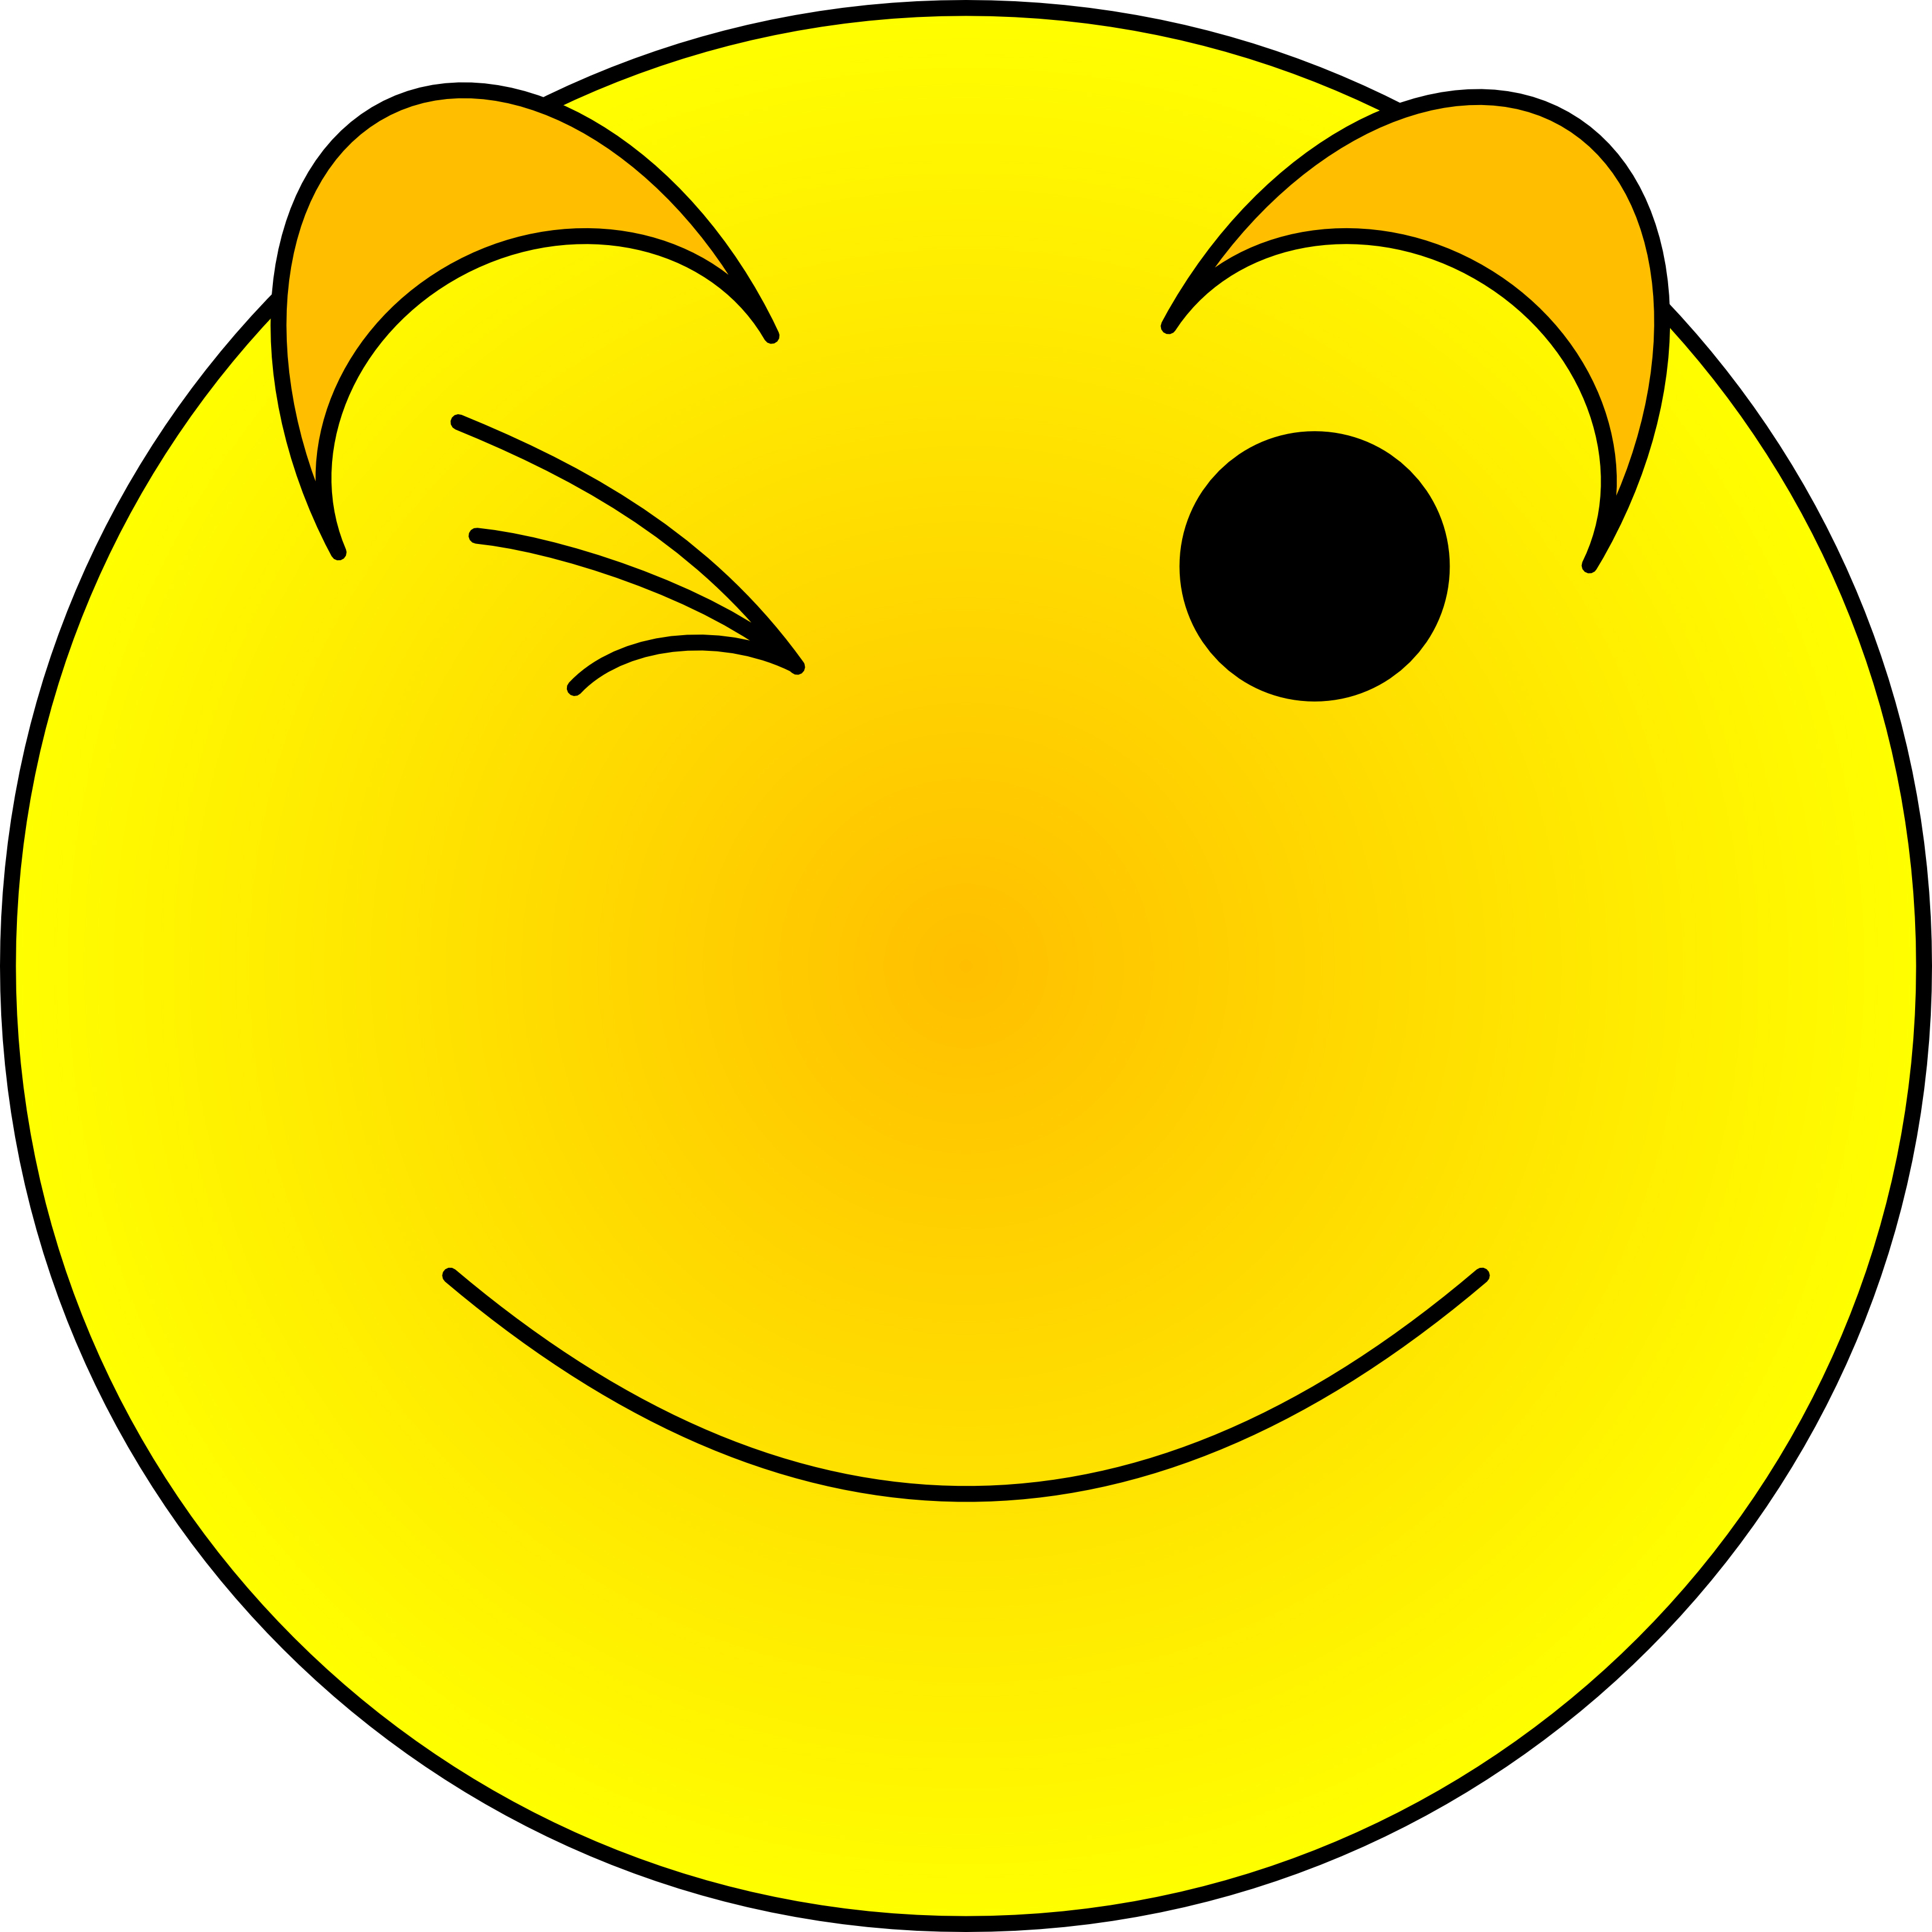 15 Crazy Smiley Face Clip Art Free Cliparts That You Can Download To